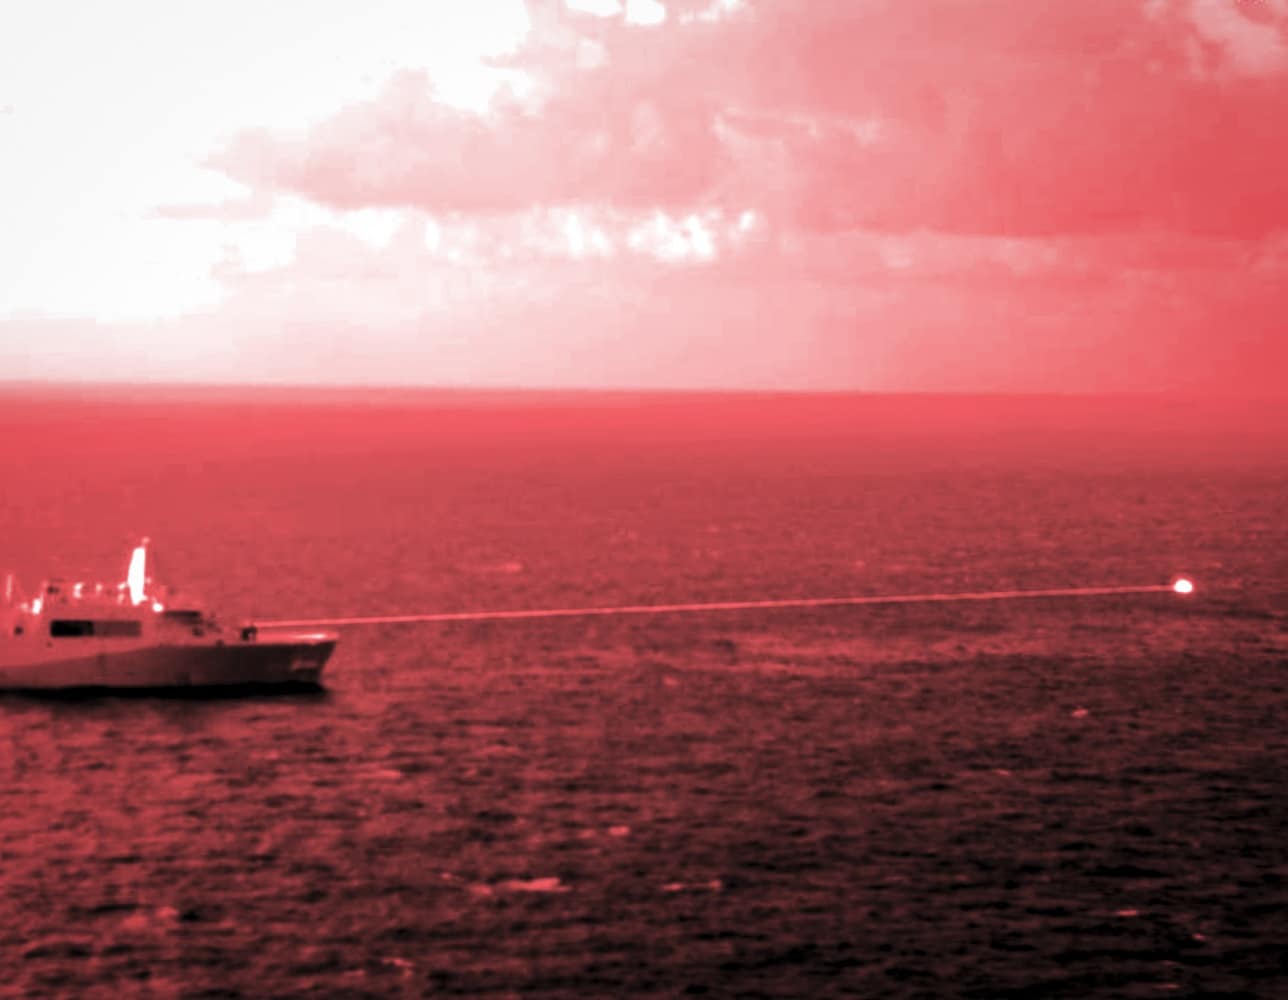 Amphibious transport dock ship USS Portland conducts a high-energy laser weapon system demonstration on a static surface training target while sailing in the Gulf of Aden. The photo was captured using a short wave infrared lens and optical filter. Courtesy of Staff Sgt. Donald Holbert, U.S. Marine Corps.